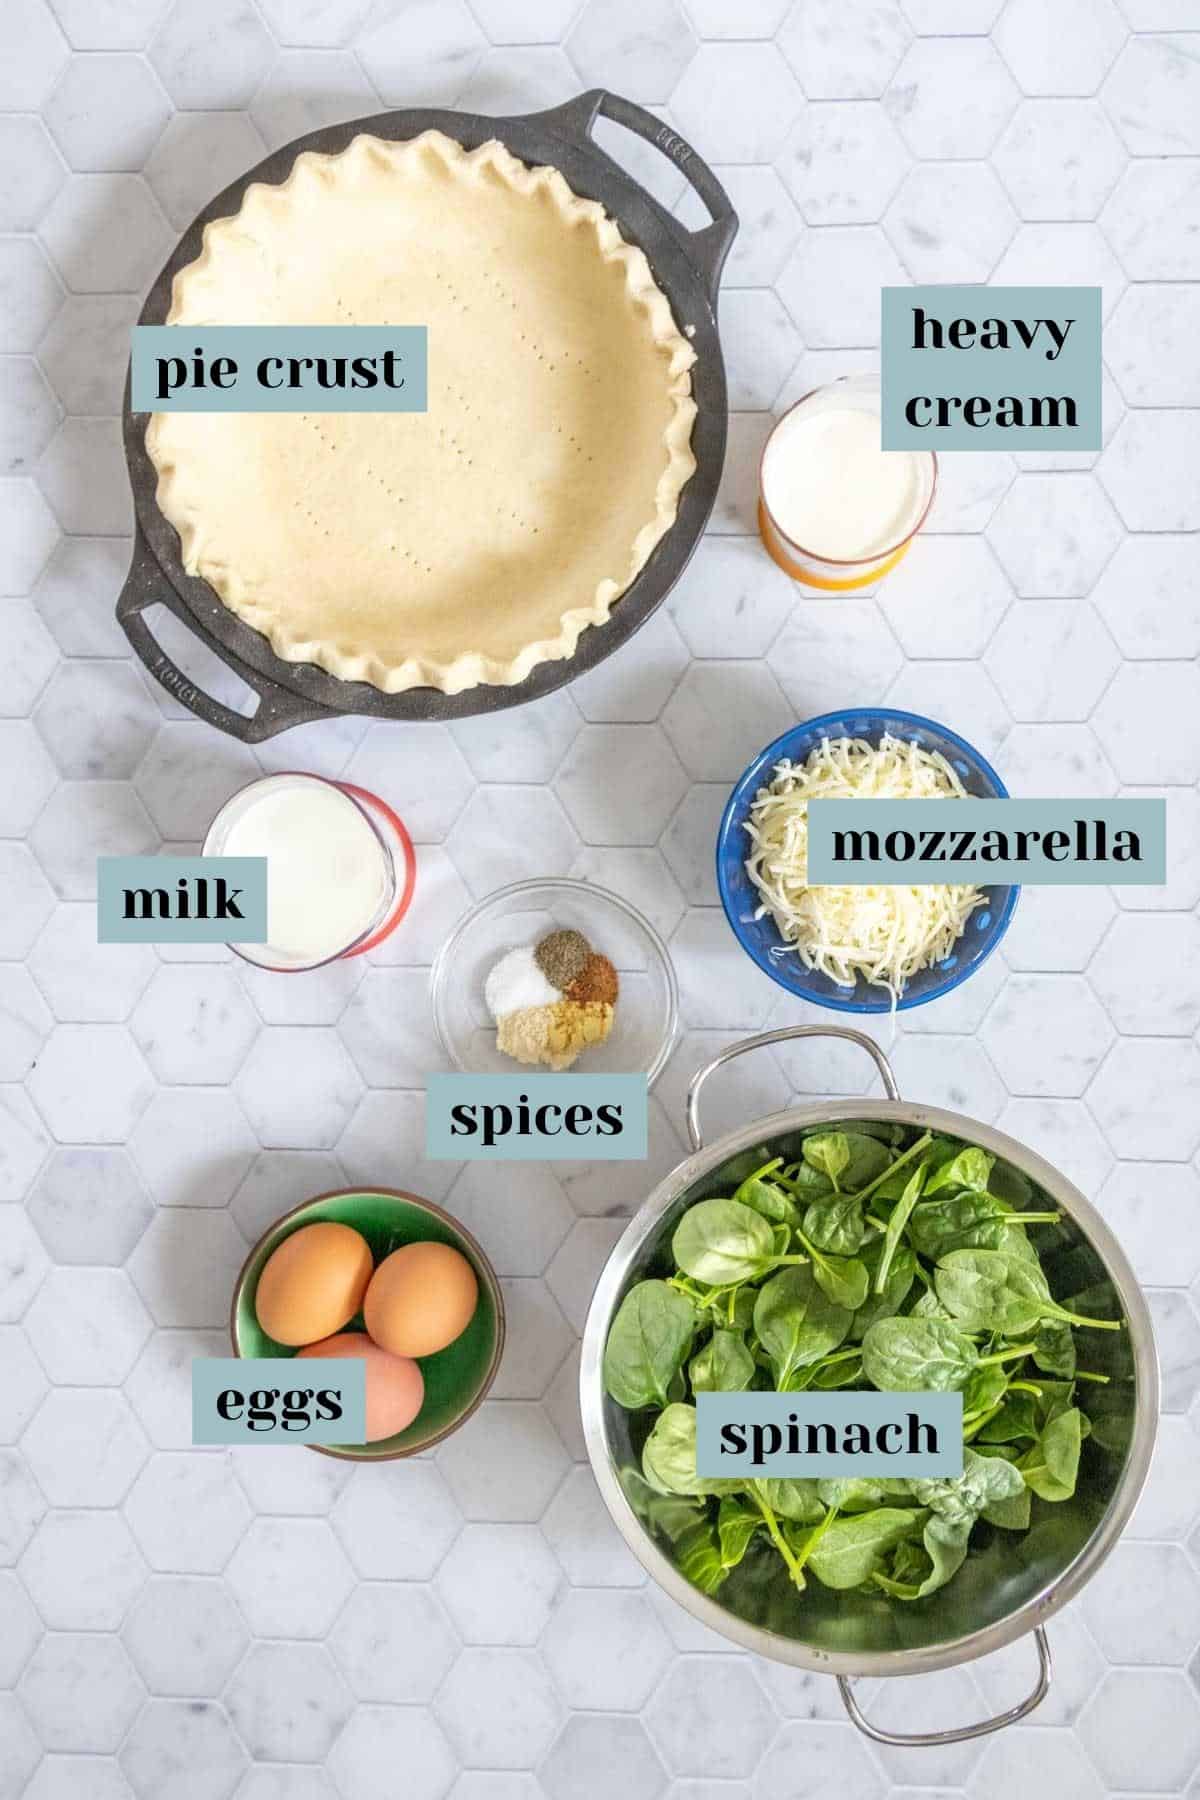 Ingredients for spinach quiche on a tile surface with labels.